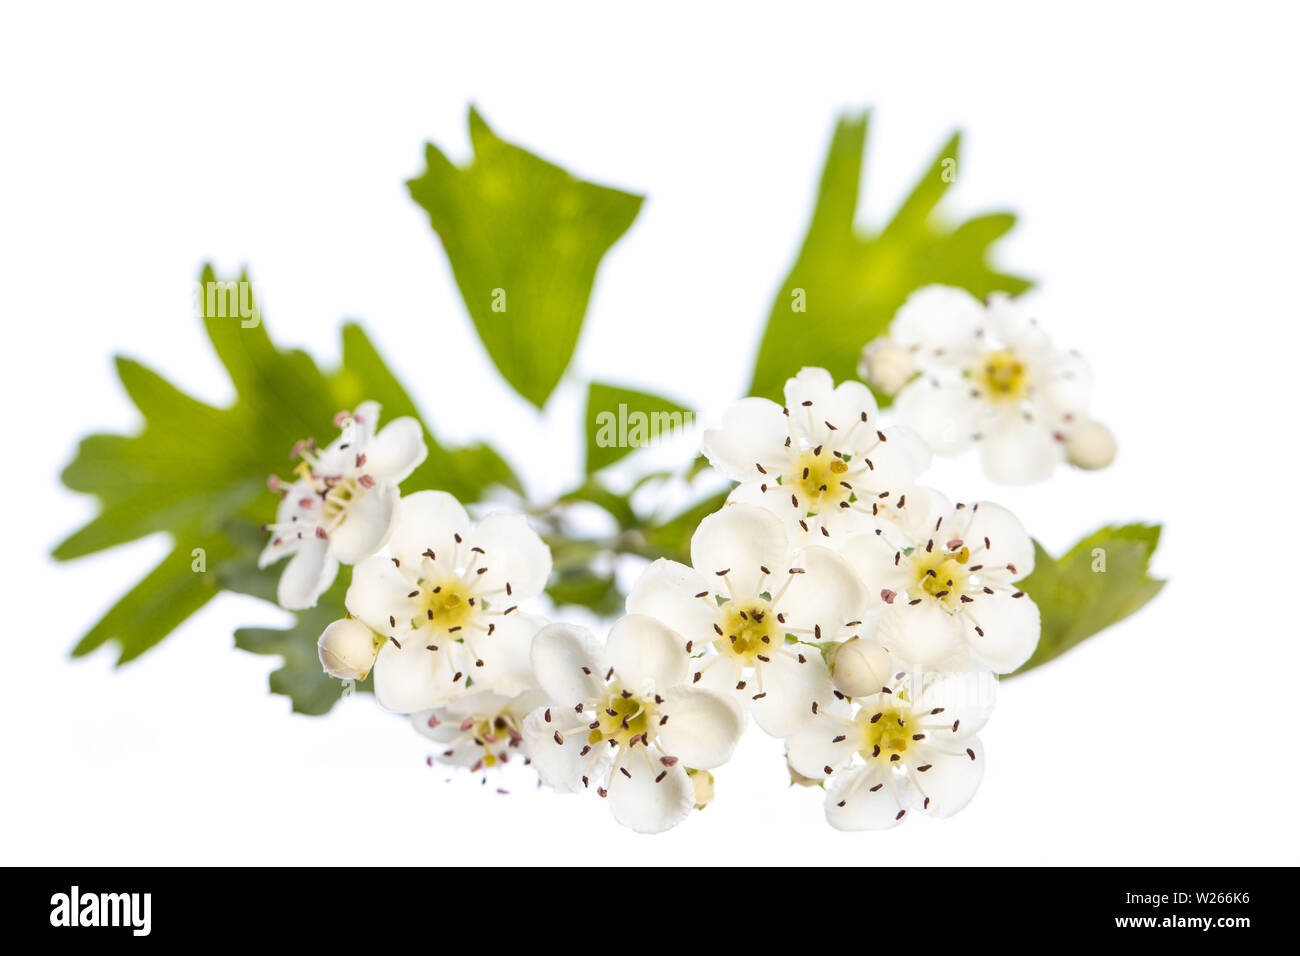 healing / medicinal plants: Hawthorn (Crataegus monogyna) branch with flowers and leafs on a white background Stock Photo